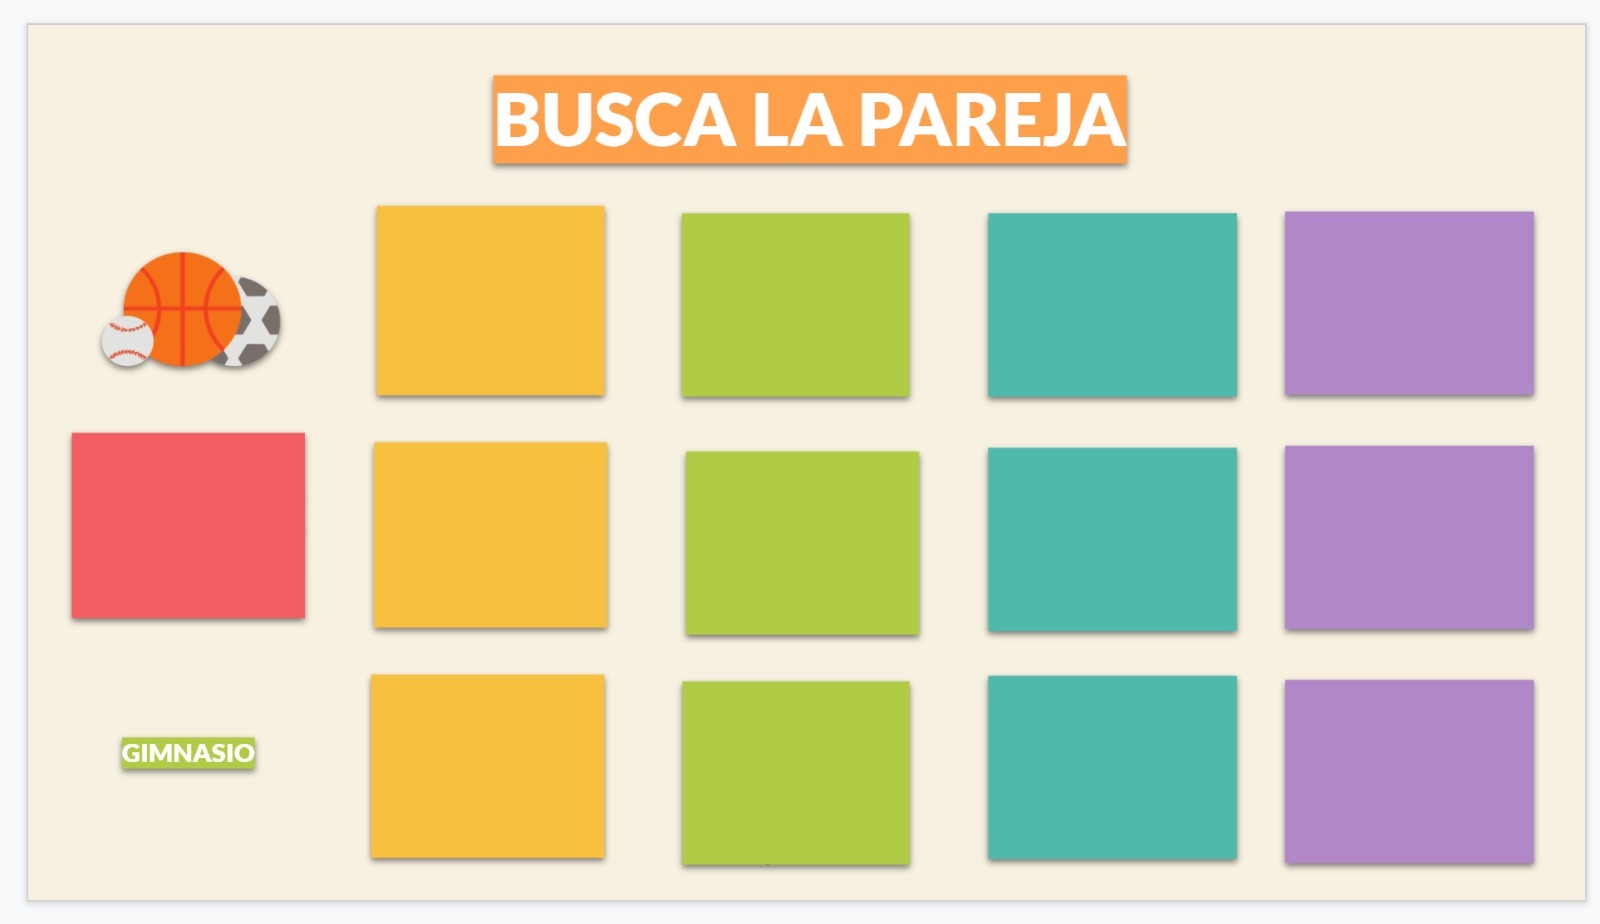 A grid of 15 colored squares on a neutral background with 2 squares removed reveal illustration of balls in one space and the Spanish word, gimnasio, in the other.